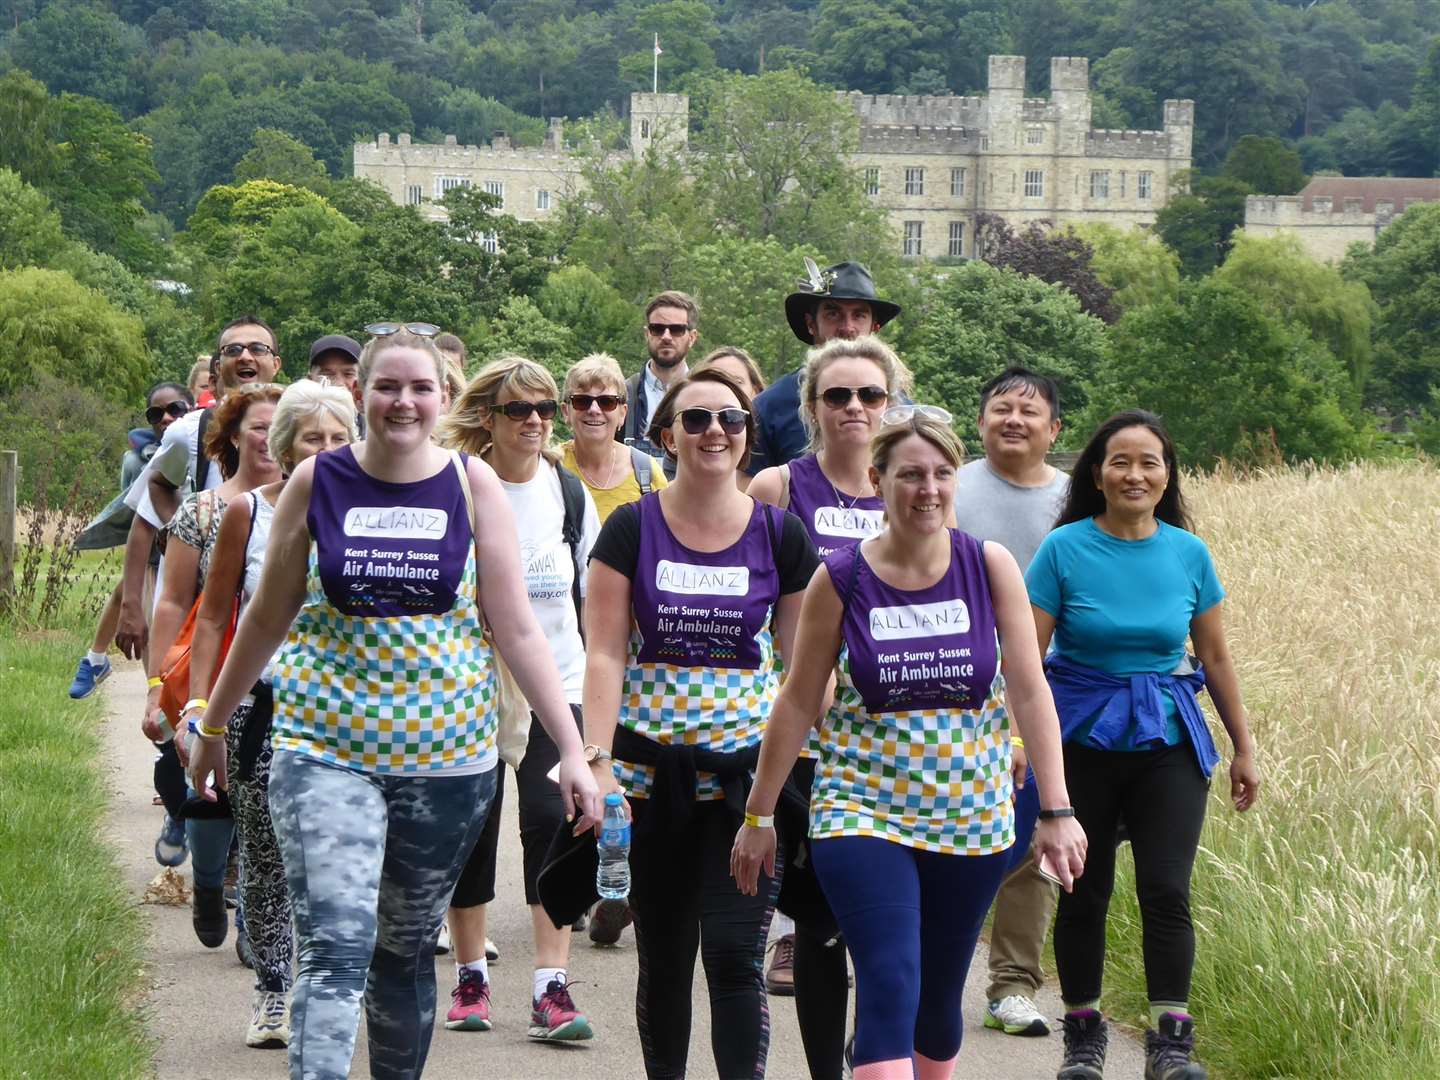 The KM Charity Walk links Mote House with Leeds Castle in Maidstone. (2389734)